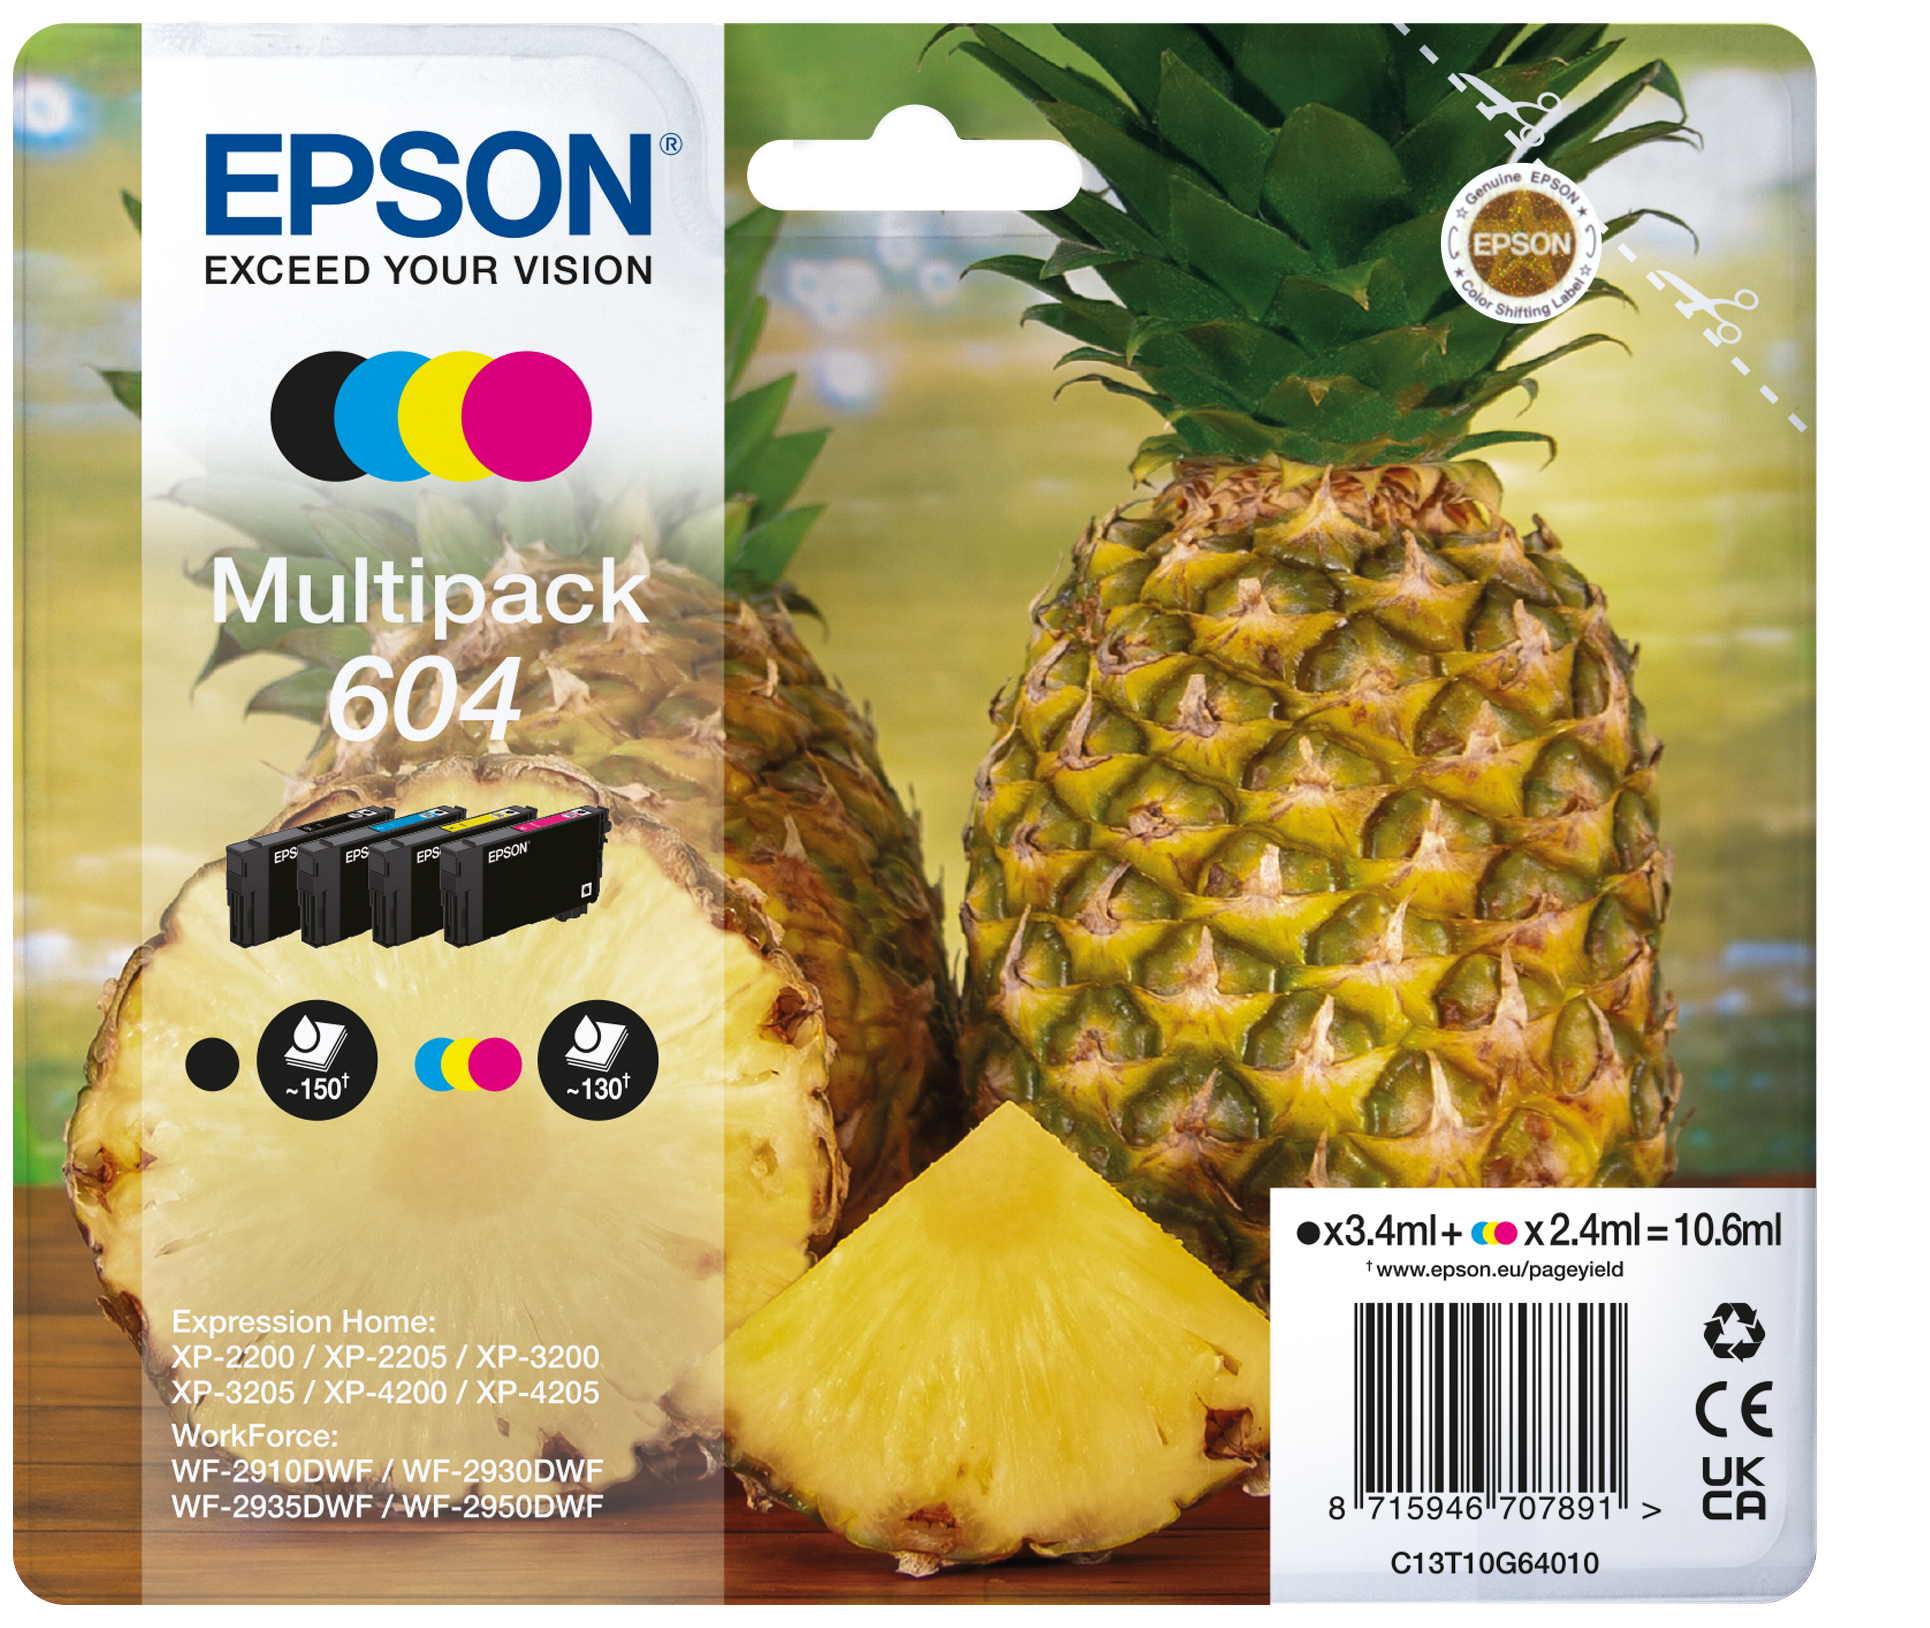 Inkjet XP-3205 Consumer | Printers | Printers | | Expression Europe Home Epson Products |